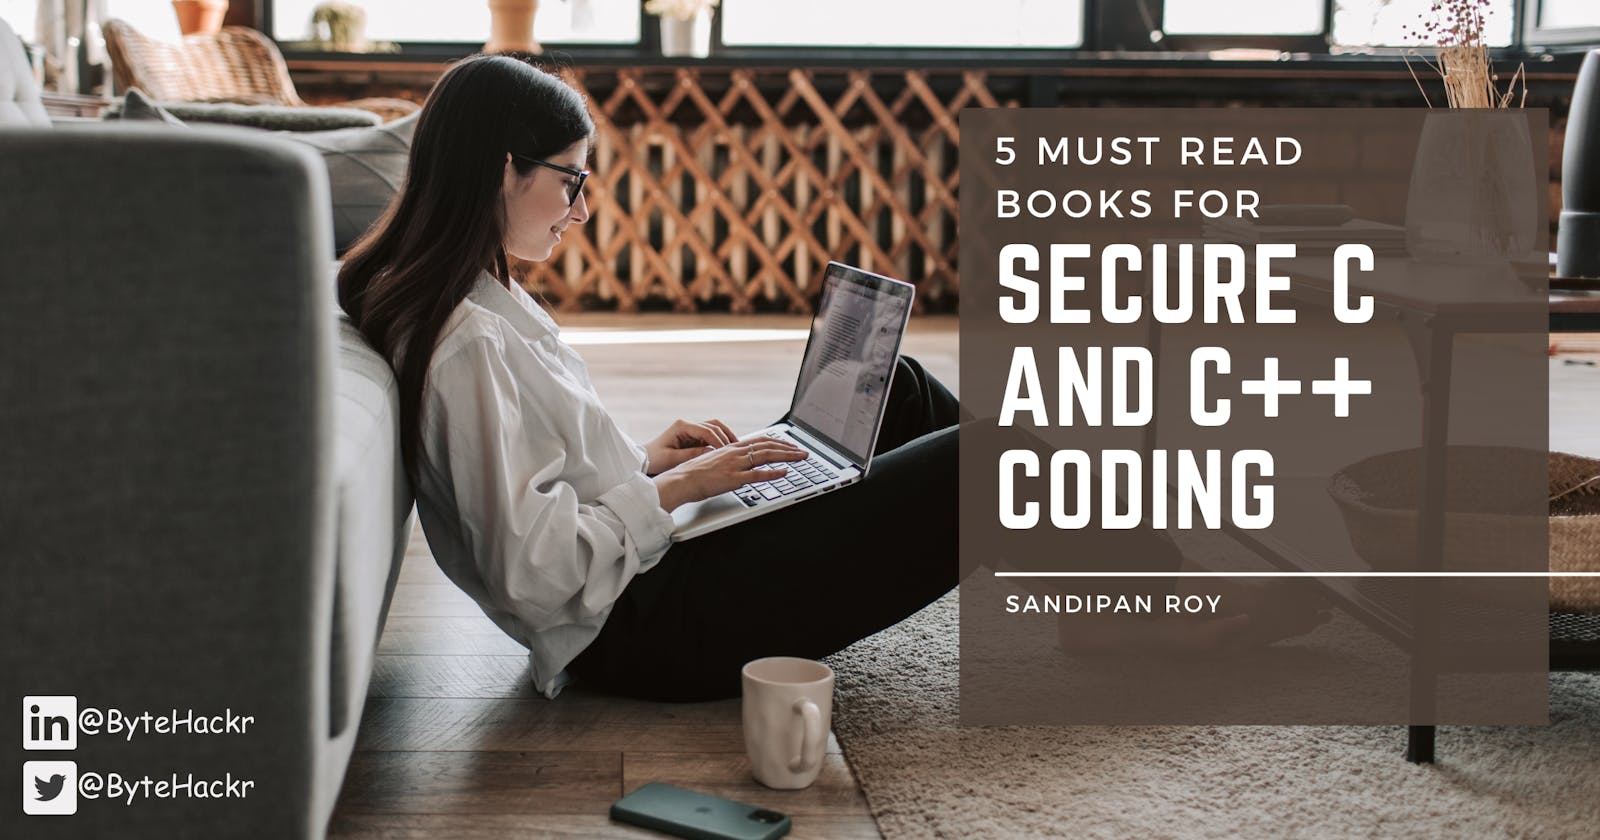 5 Must-Read Books for Secure C and C++ Coding